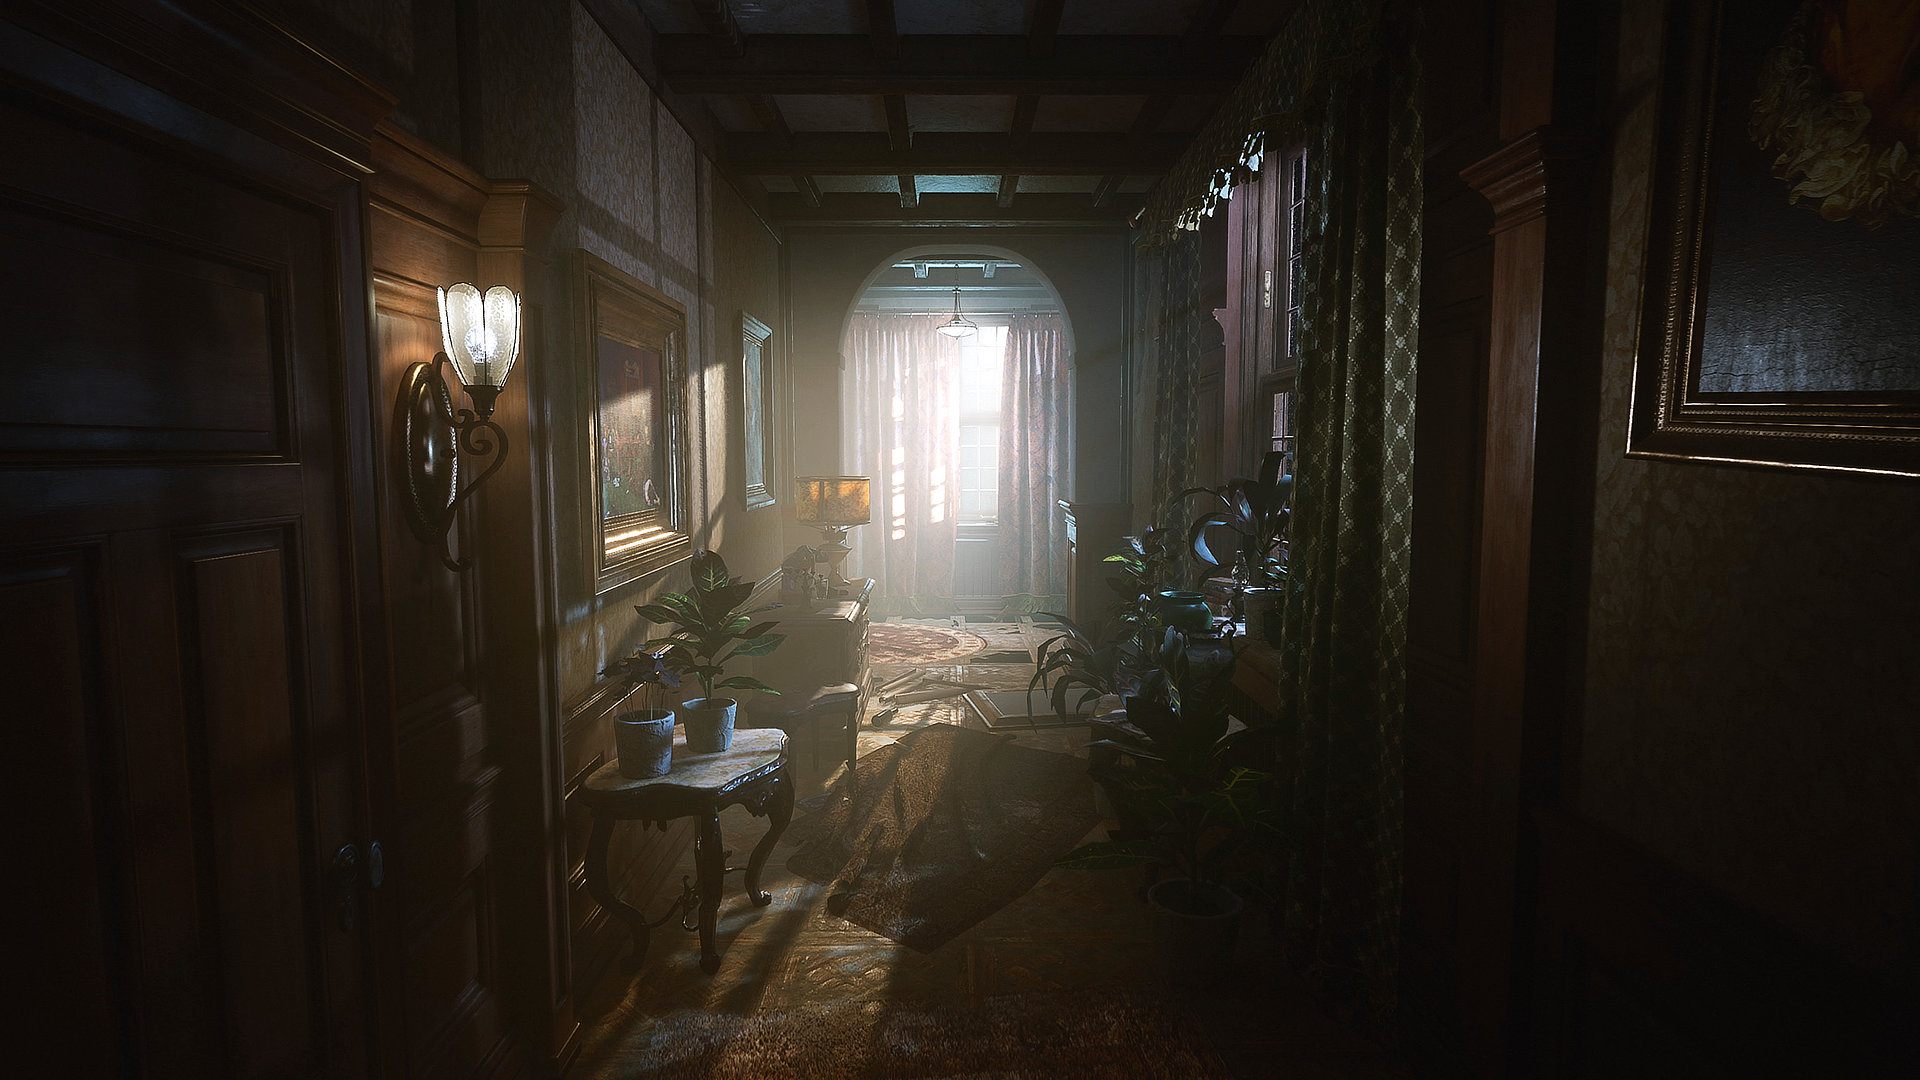 Media asset in full size related to 3dfxzone.it news item entitled as follows: Arriva la grafica next gen con il videogame Layers of Fear (Unreal Engine 5) | Image Name: news34416_Layers-of-Fear_Screenshot_2.jpg